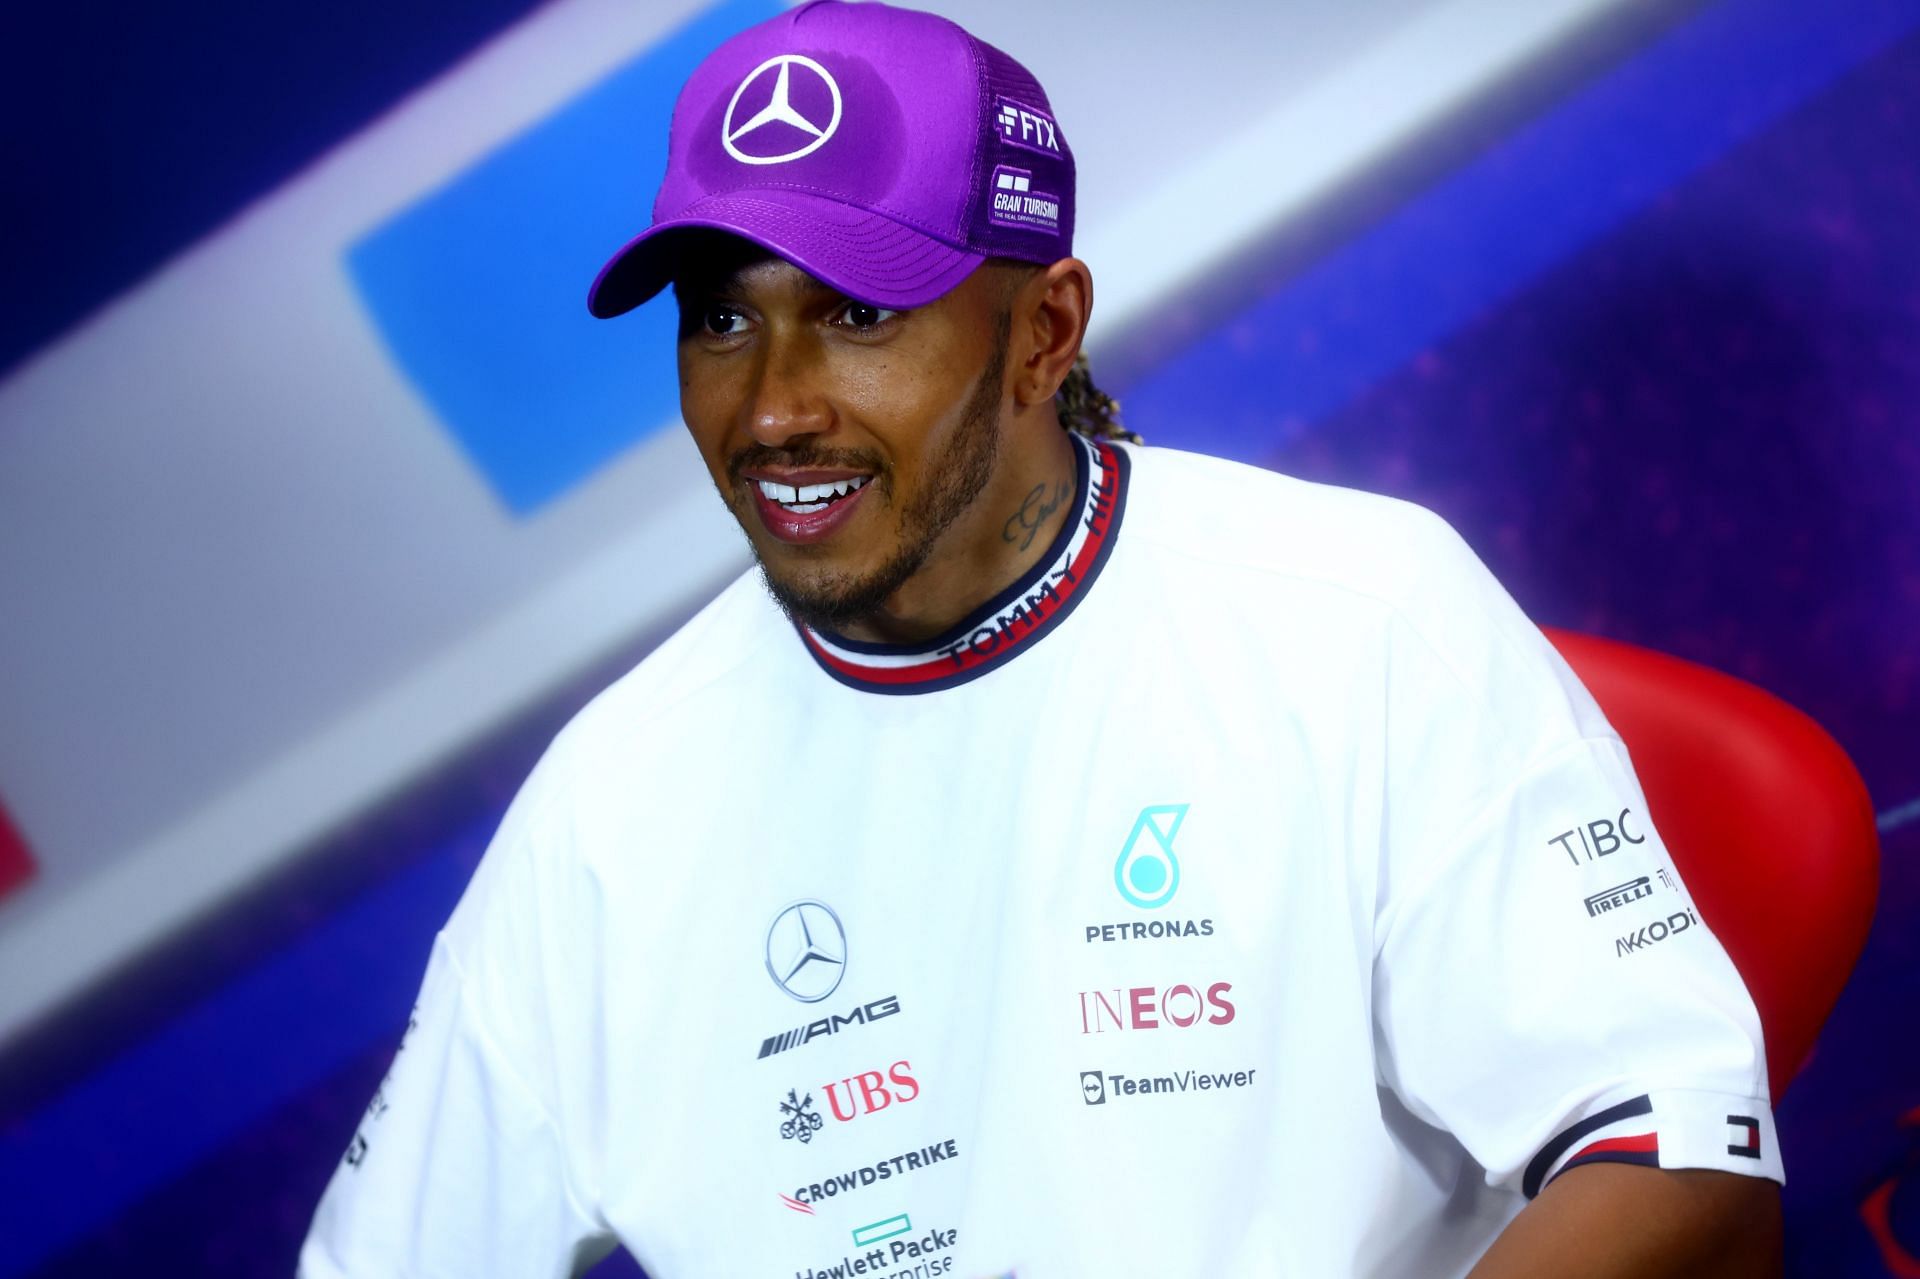 Hamilton felt that Red Bull was out of reach for him at Paul Ricard